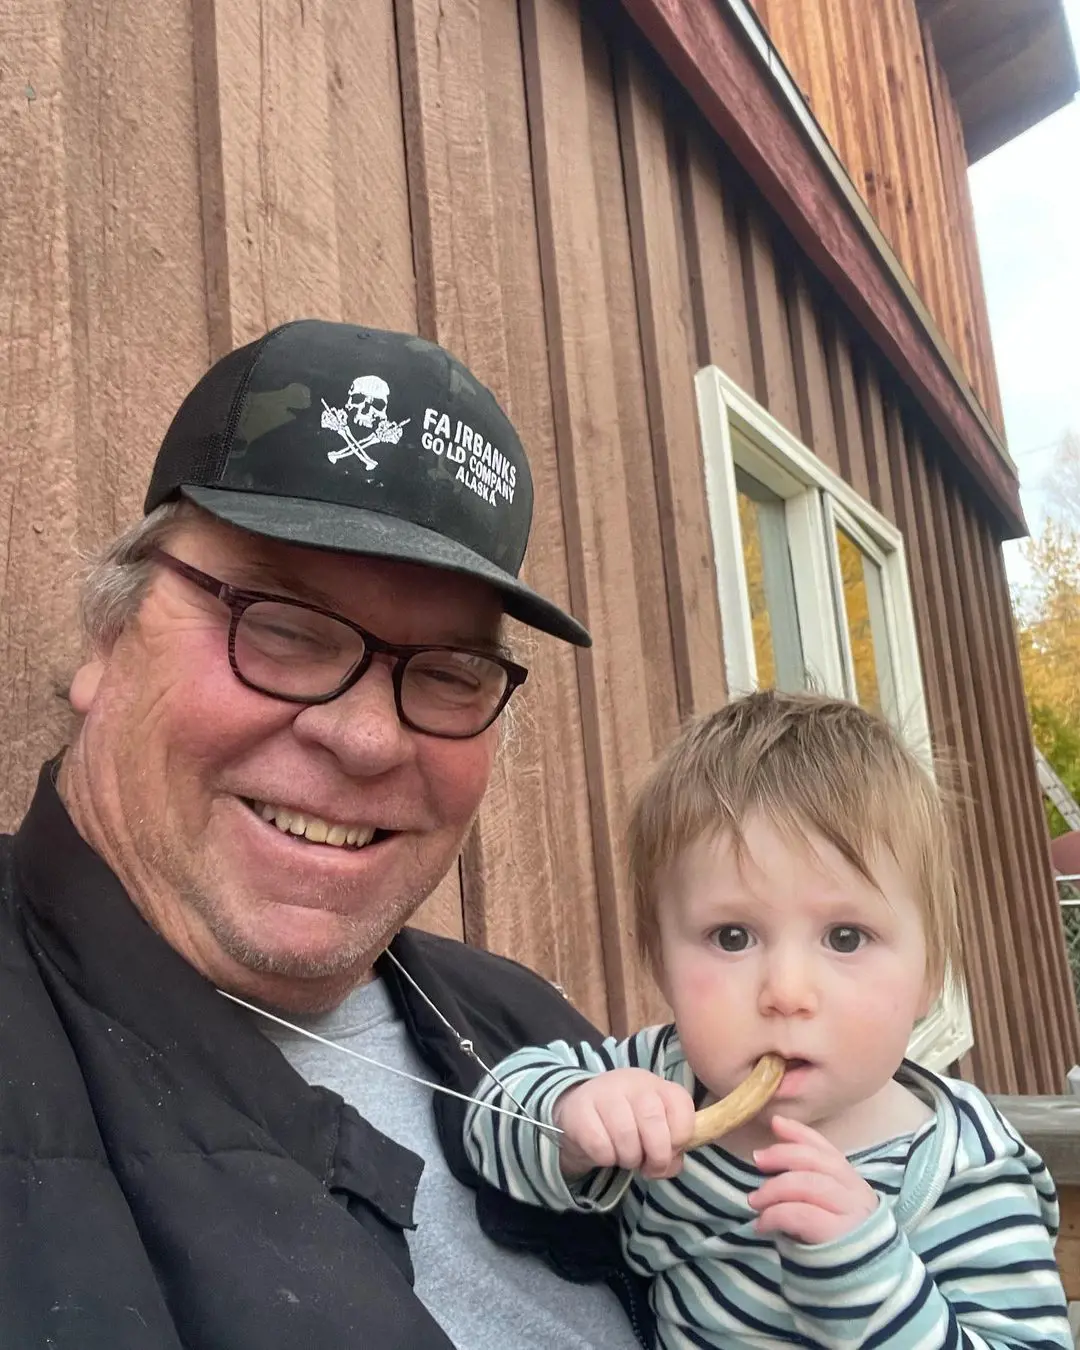 John posted a cute selfie with his grandson Jack on September 2022